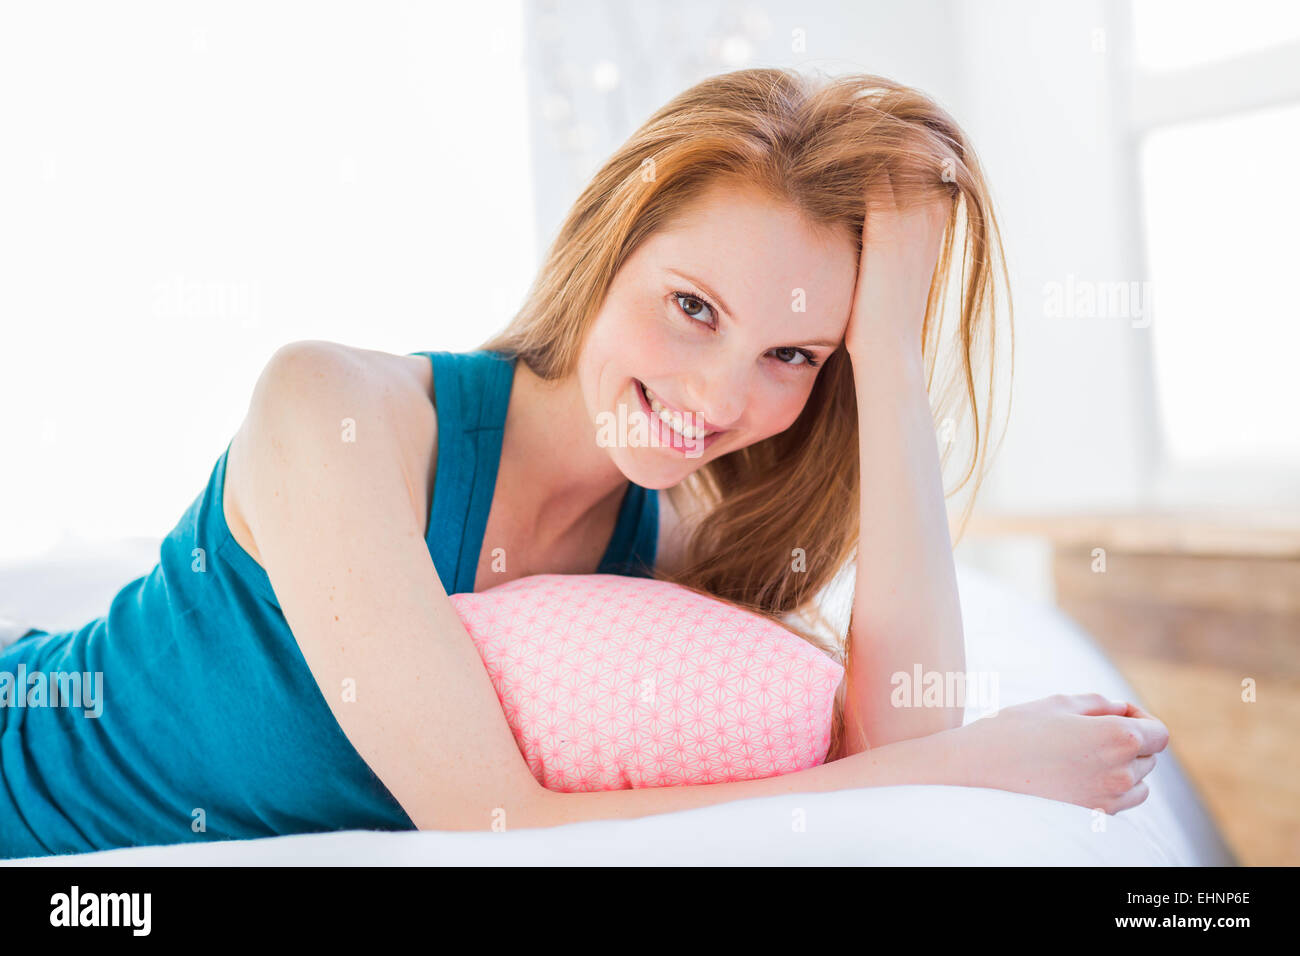 Young woman Lying in Bed. Banque D'Images